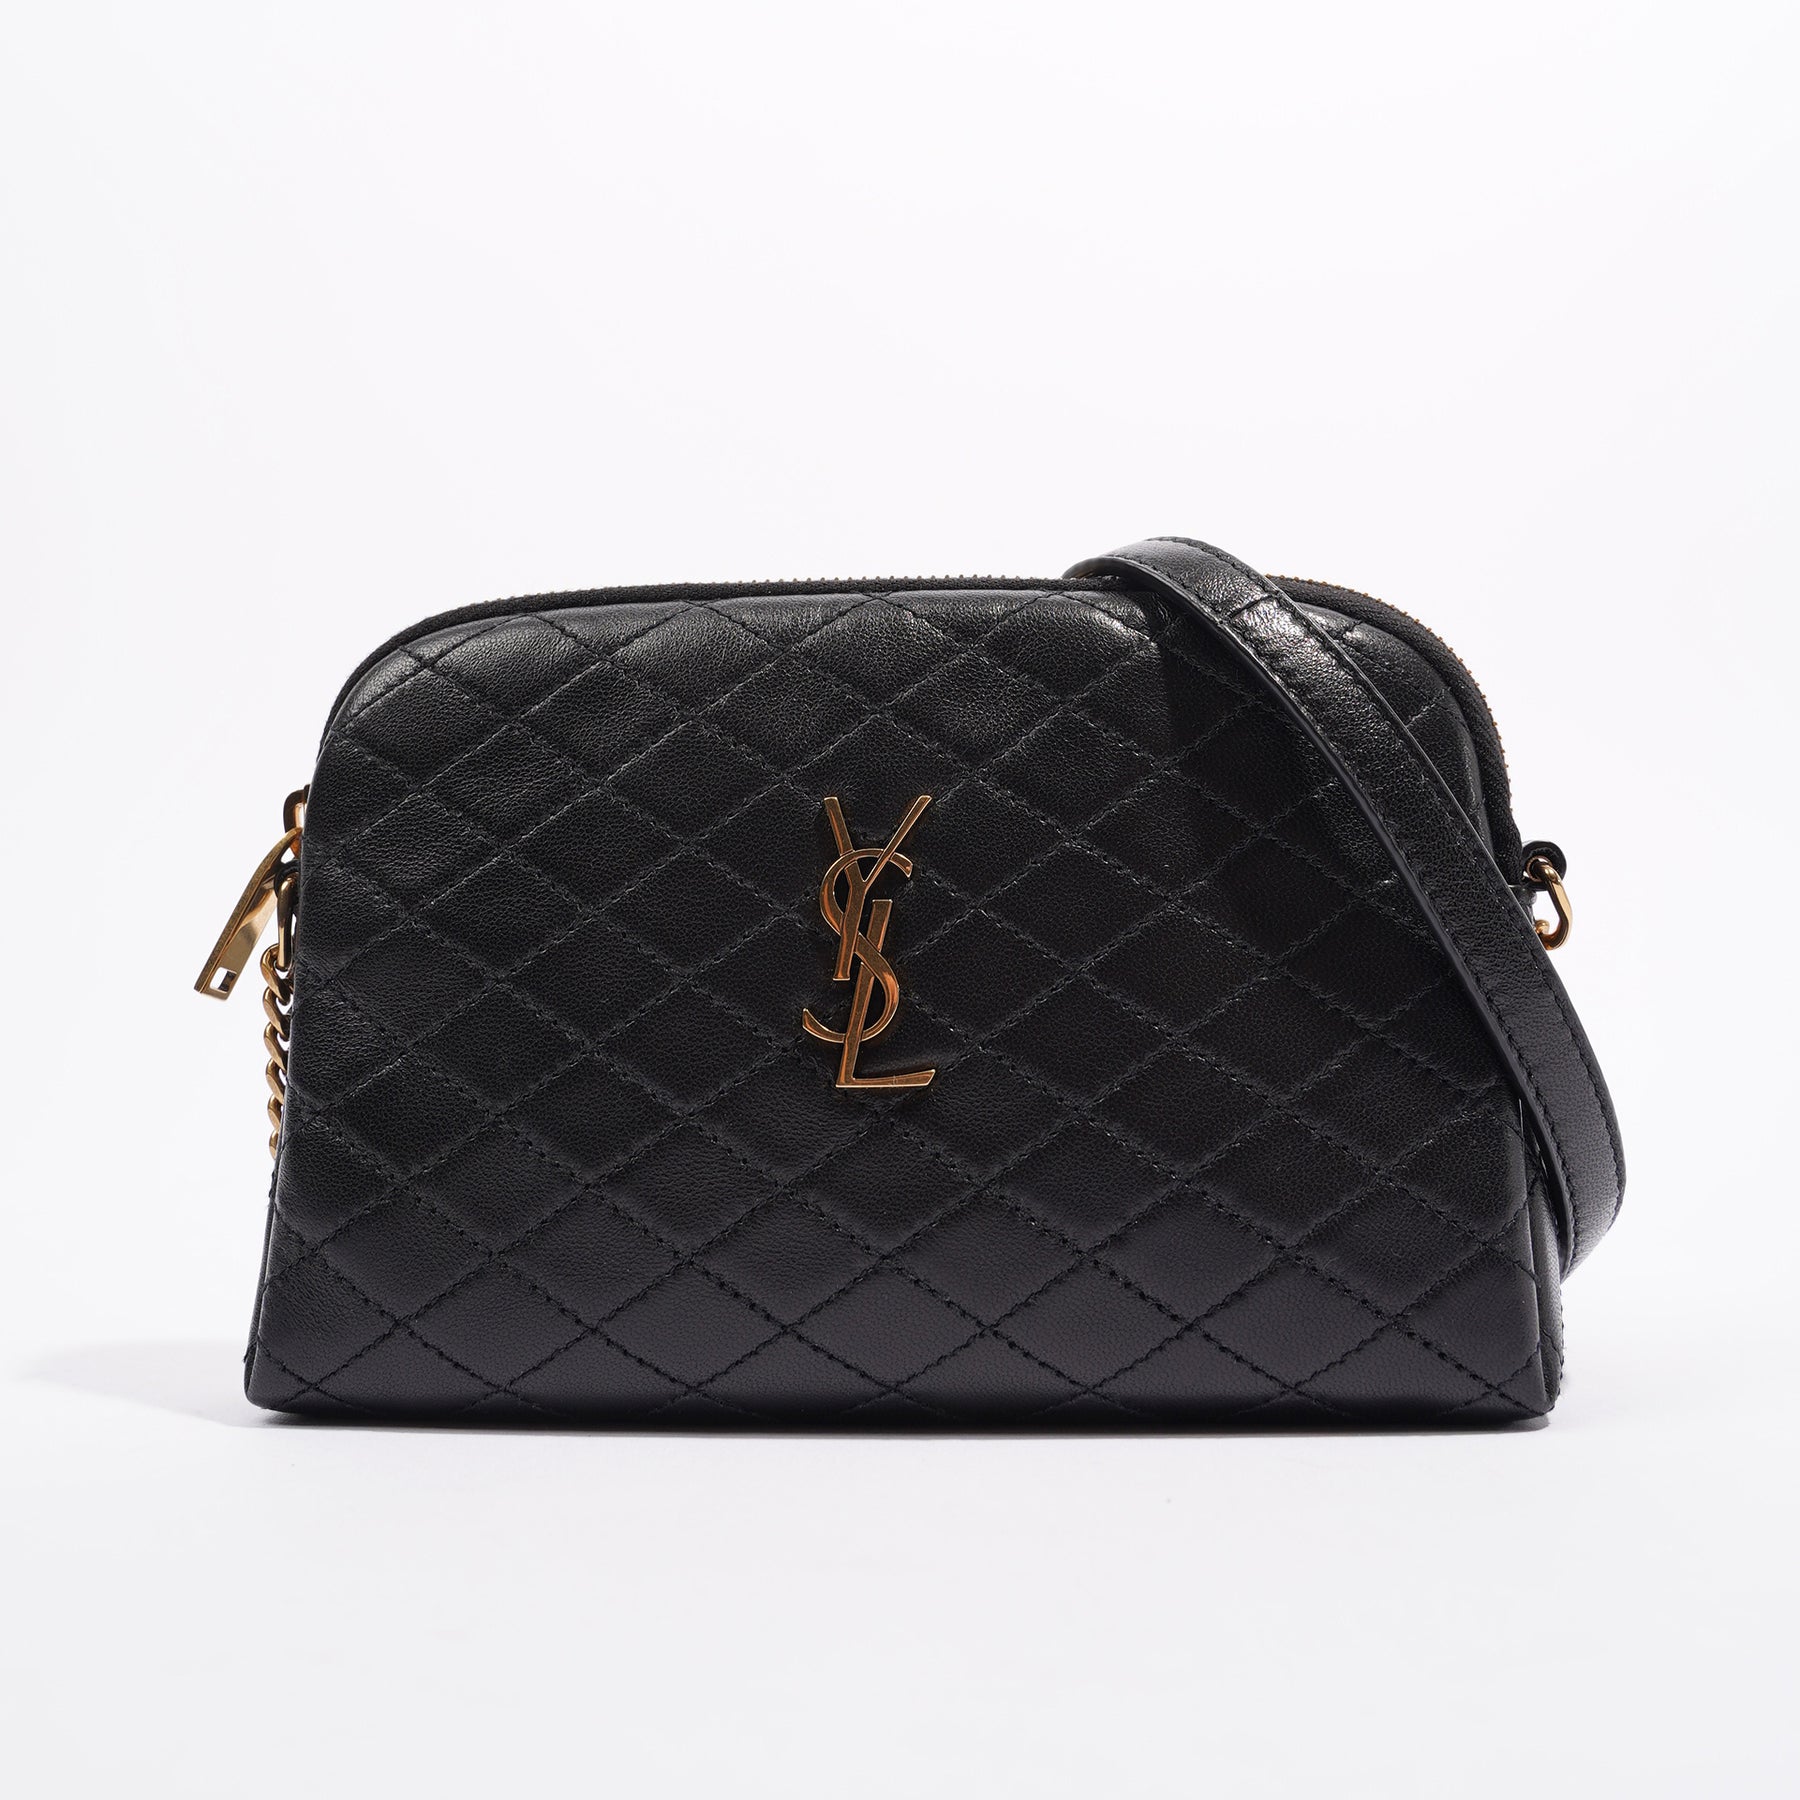 SAINT LAURENT 1290$ Gaby YSL Zipped Pouch Bag - Black Quilted Lambskin